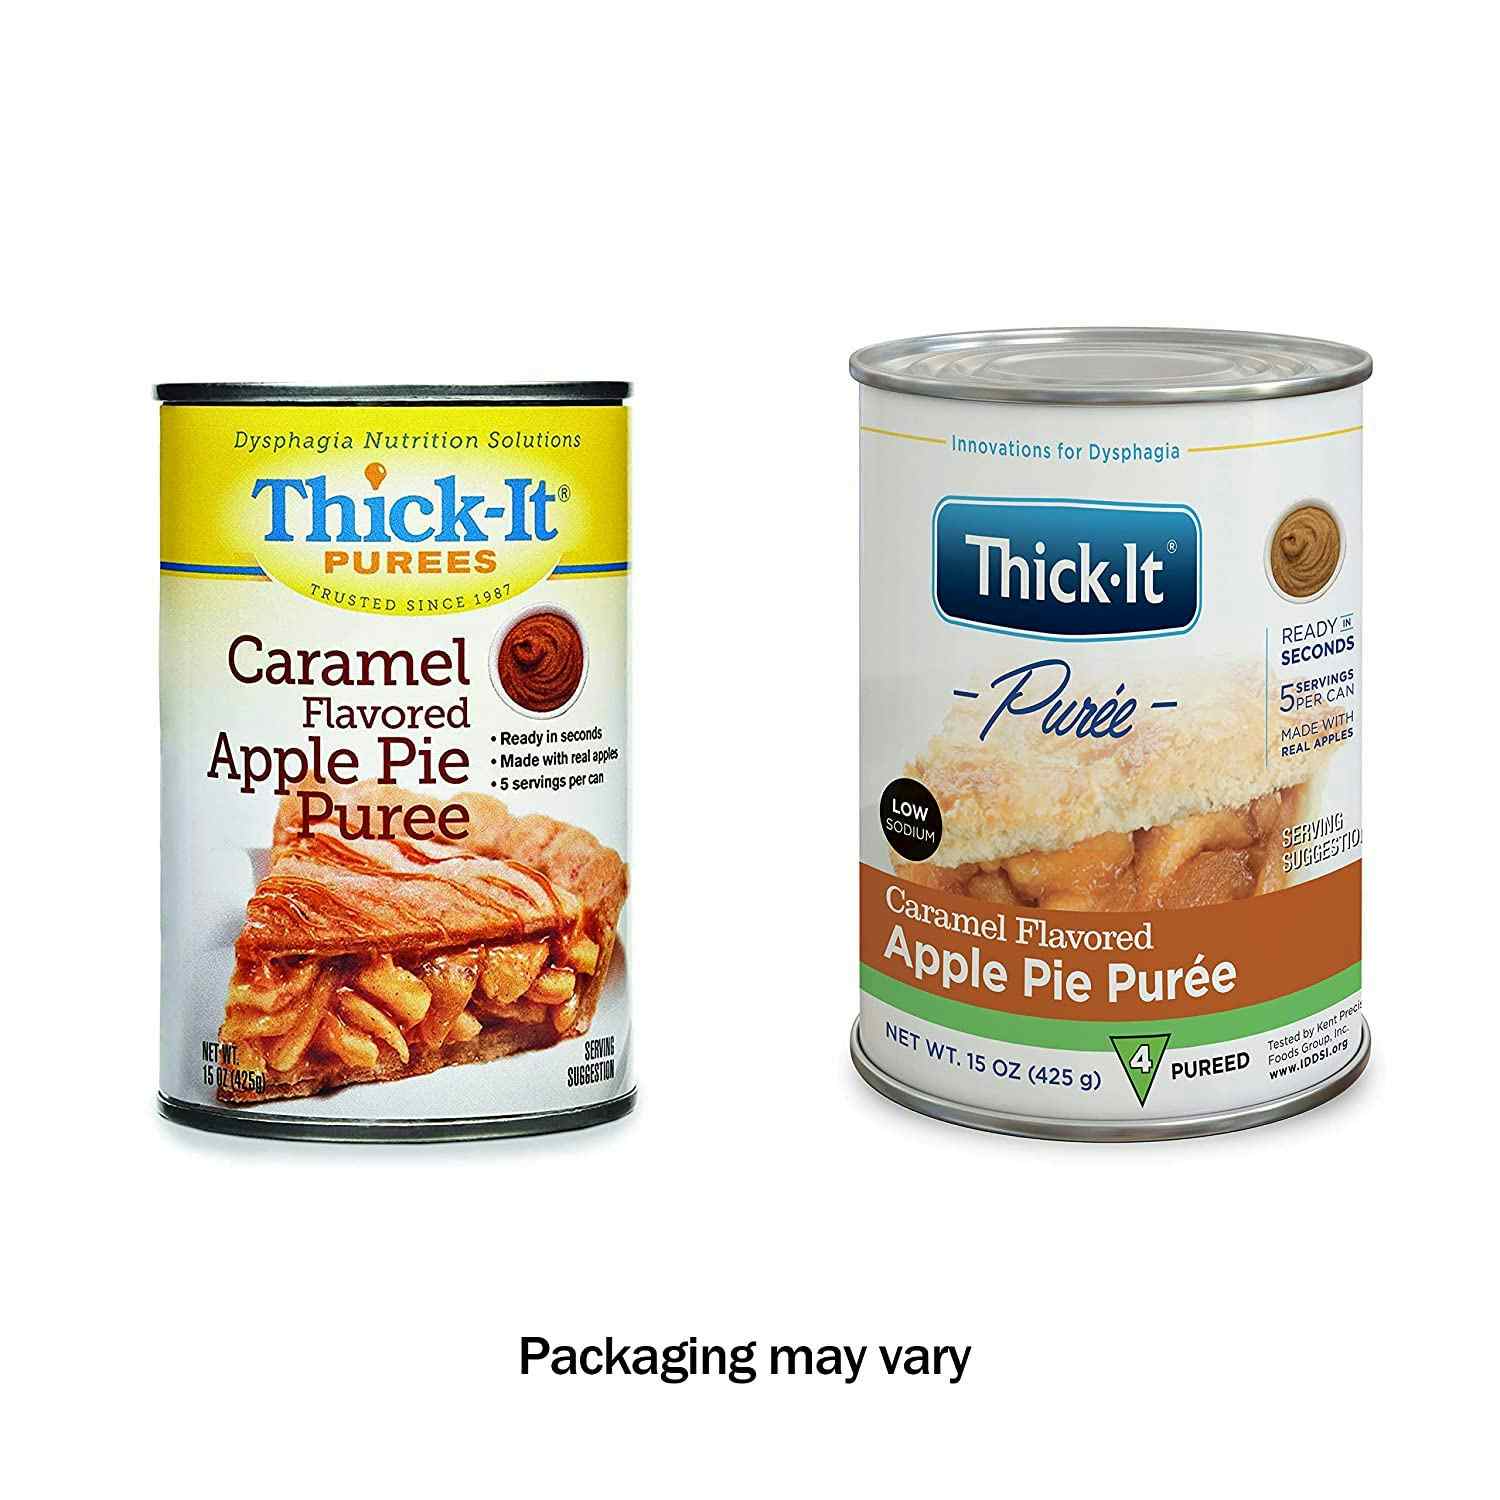 Thick-it Puree Caramel Apple Pie, H317-F8800-EA1, 1 Can Old vs. New